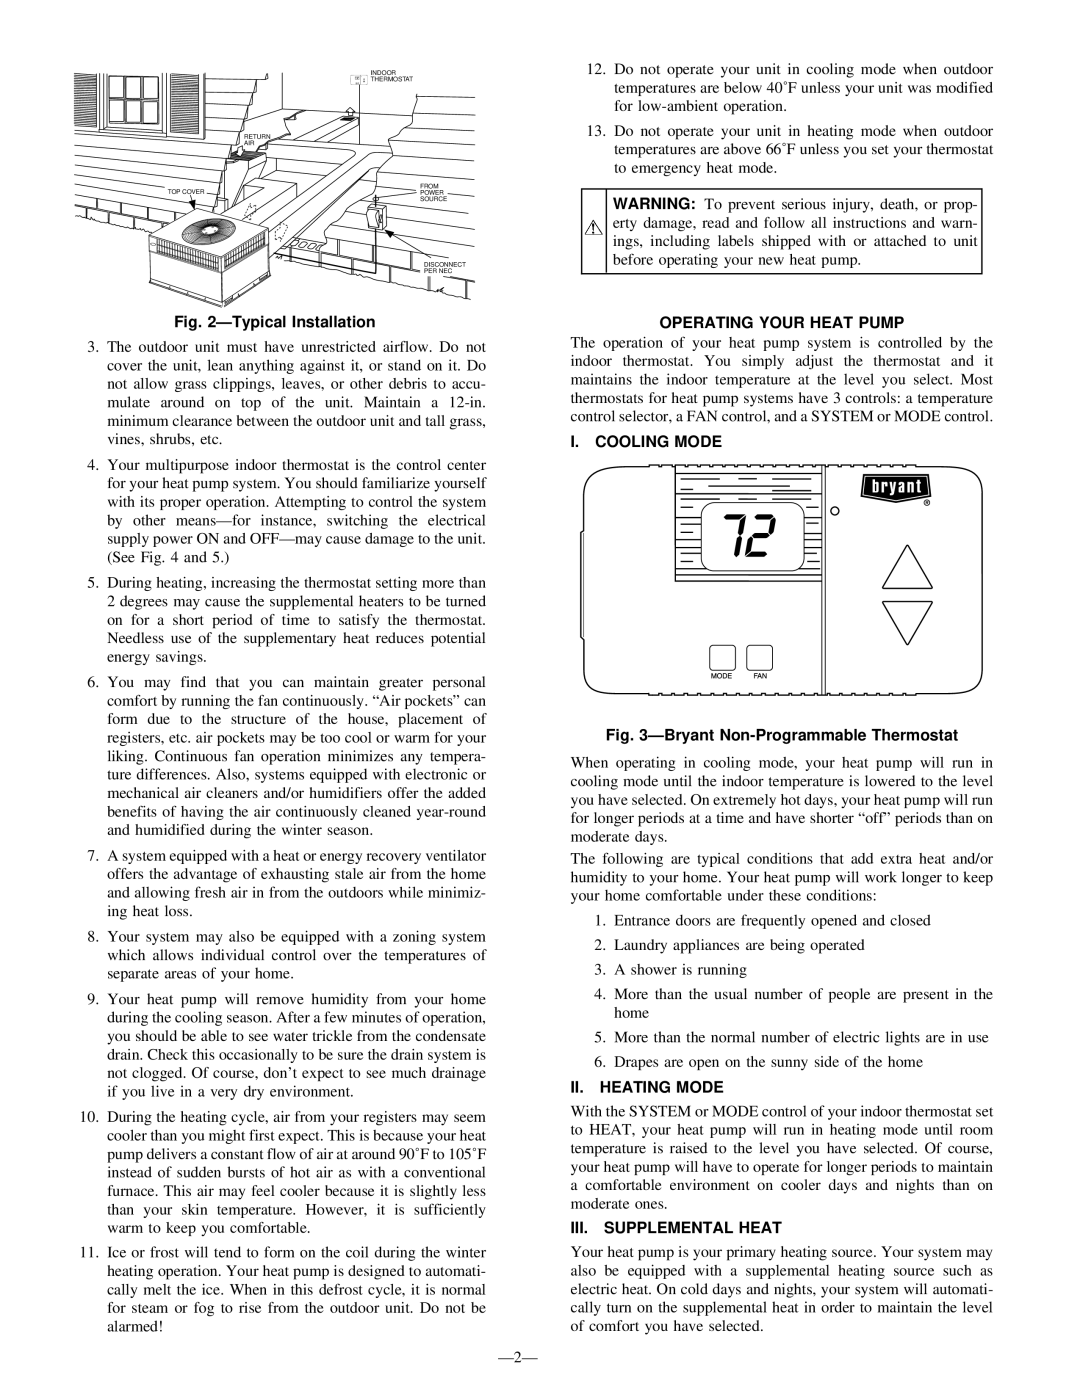 Bryant 601A, 602A manual ÐTypical Installation, Operating Your Heat Pump, I.Cooling Mode, ÐBryant Non-ProgrammableThermostat 